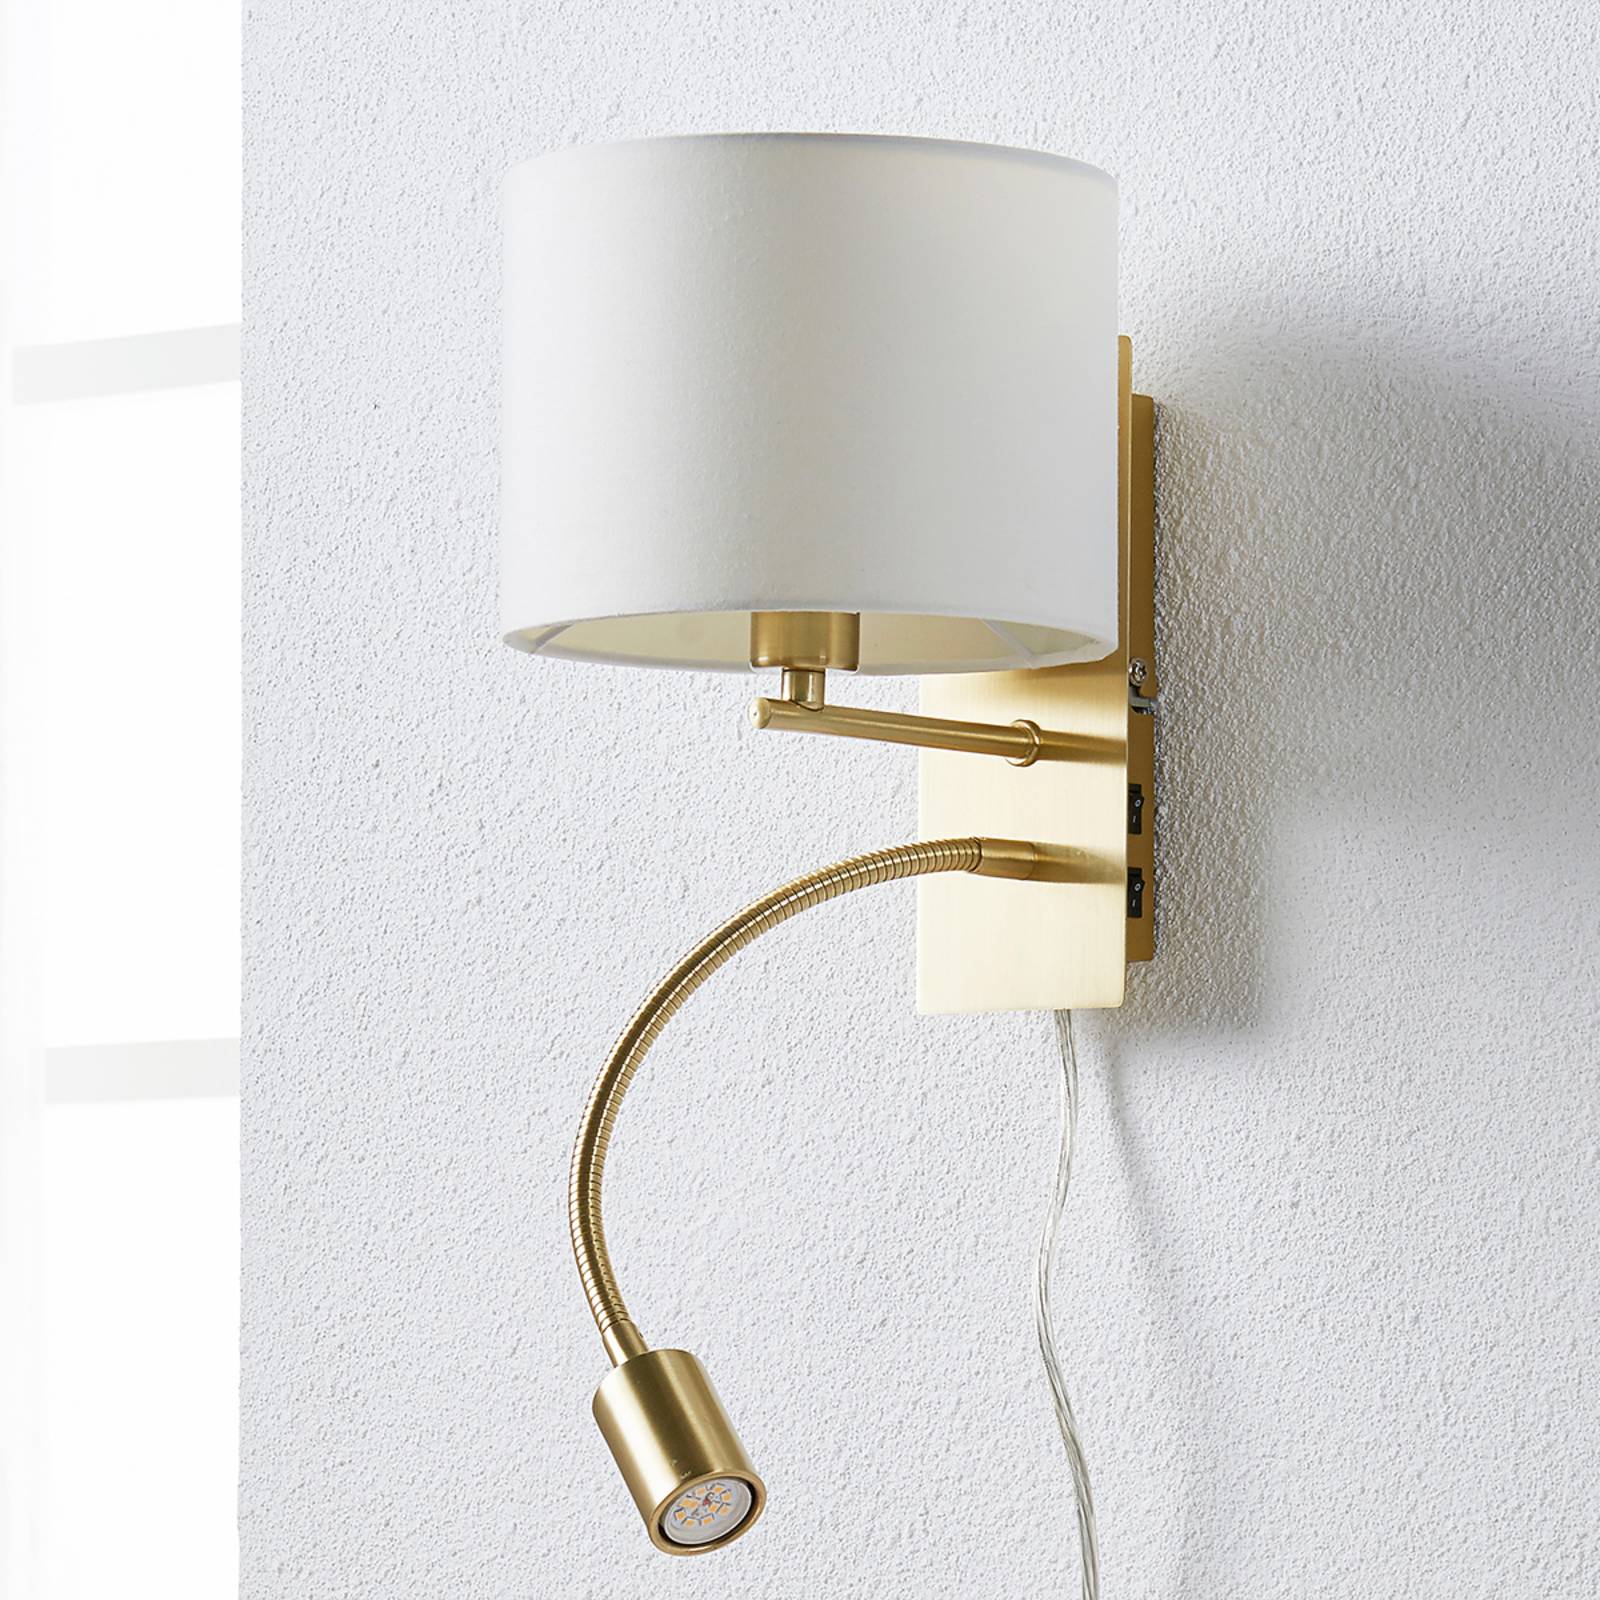 Photos - Chandelier / Lamp Lindby Brass-coloured wall lamp Florens LED reading light 